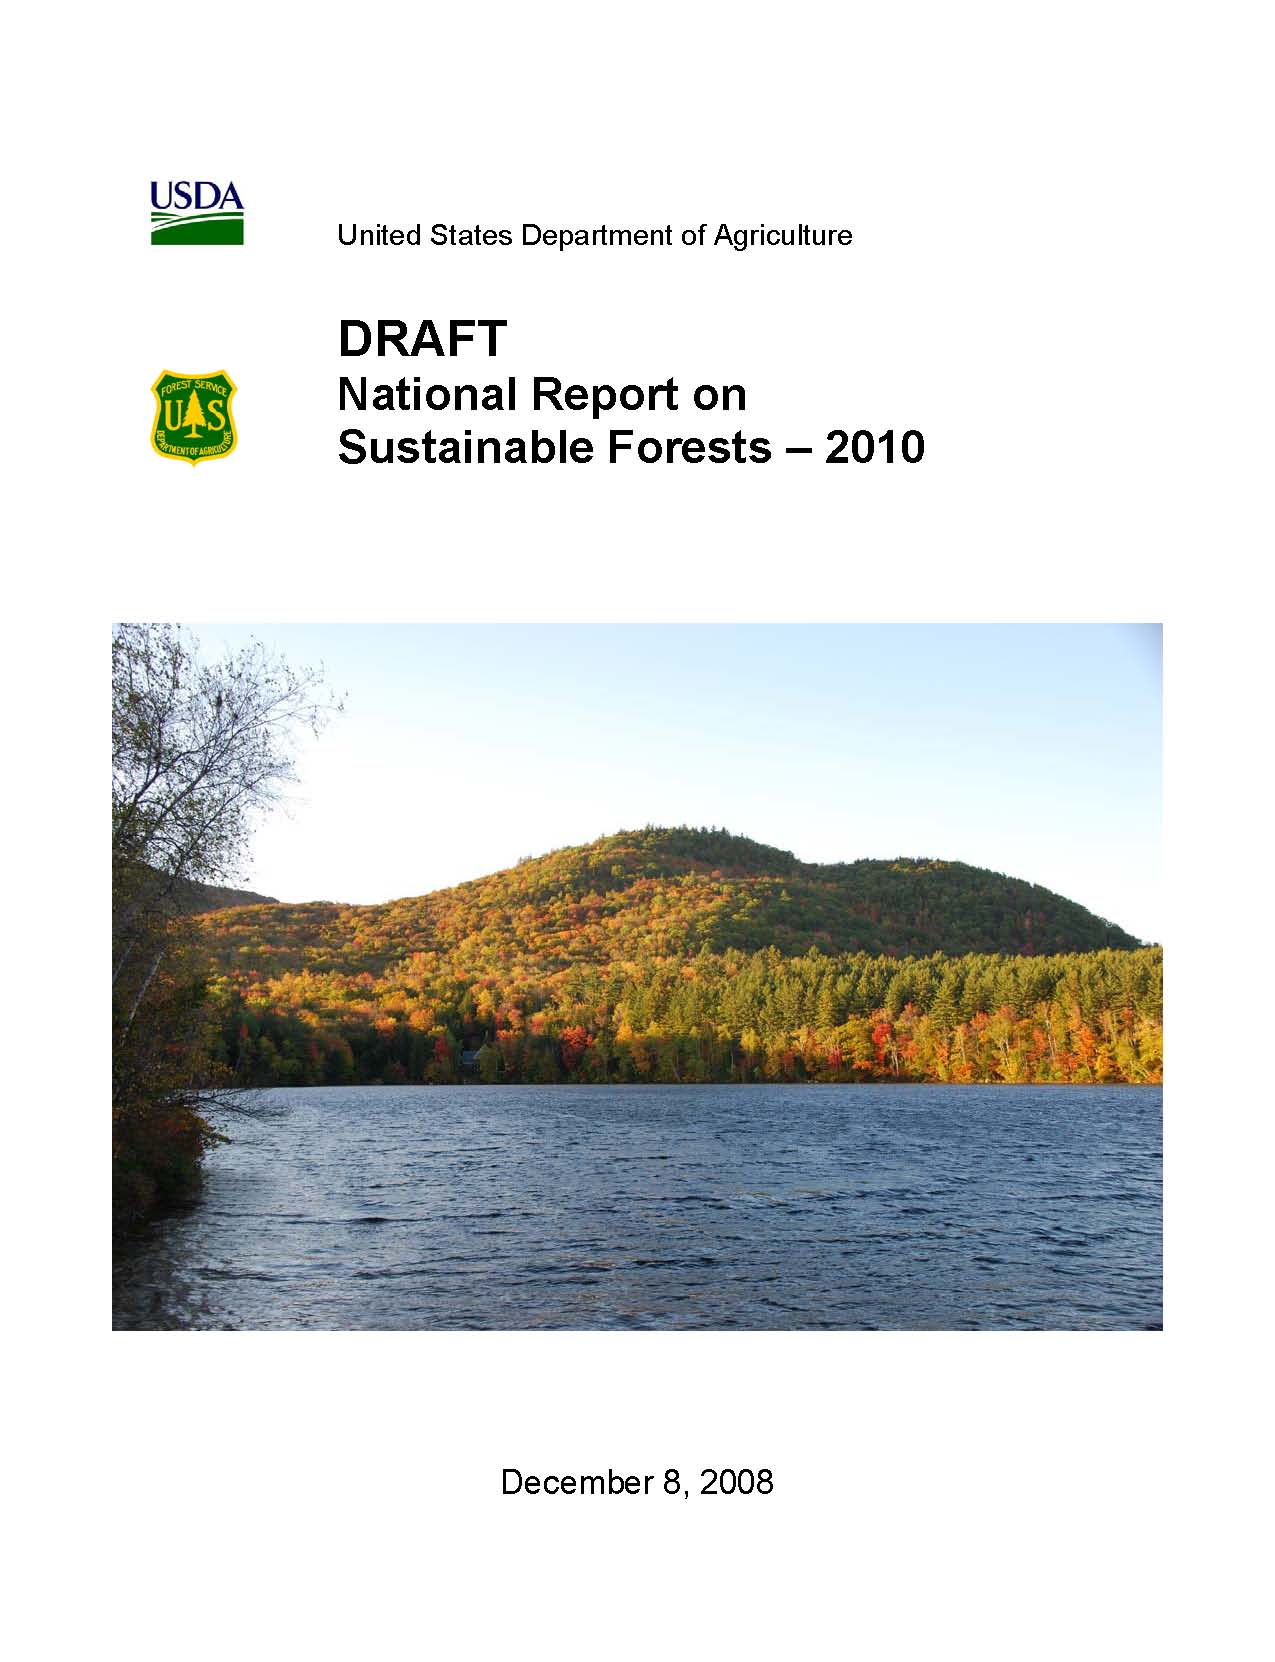 Photo: Sustainability Report Cover Page.